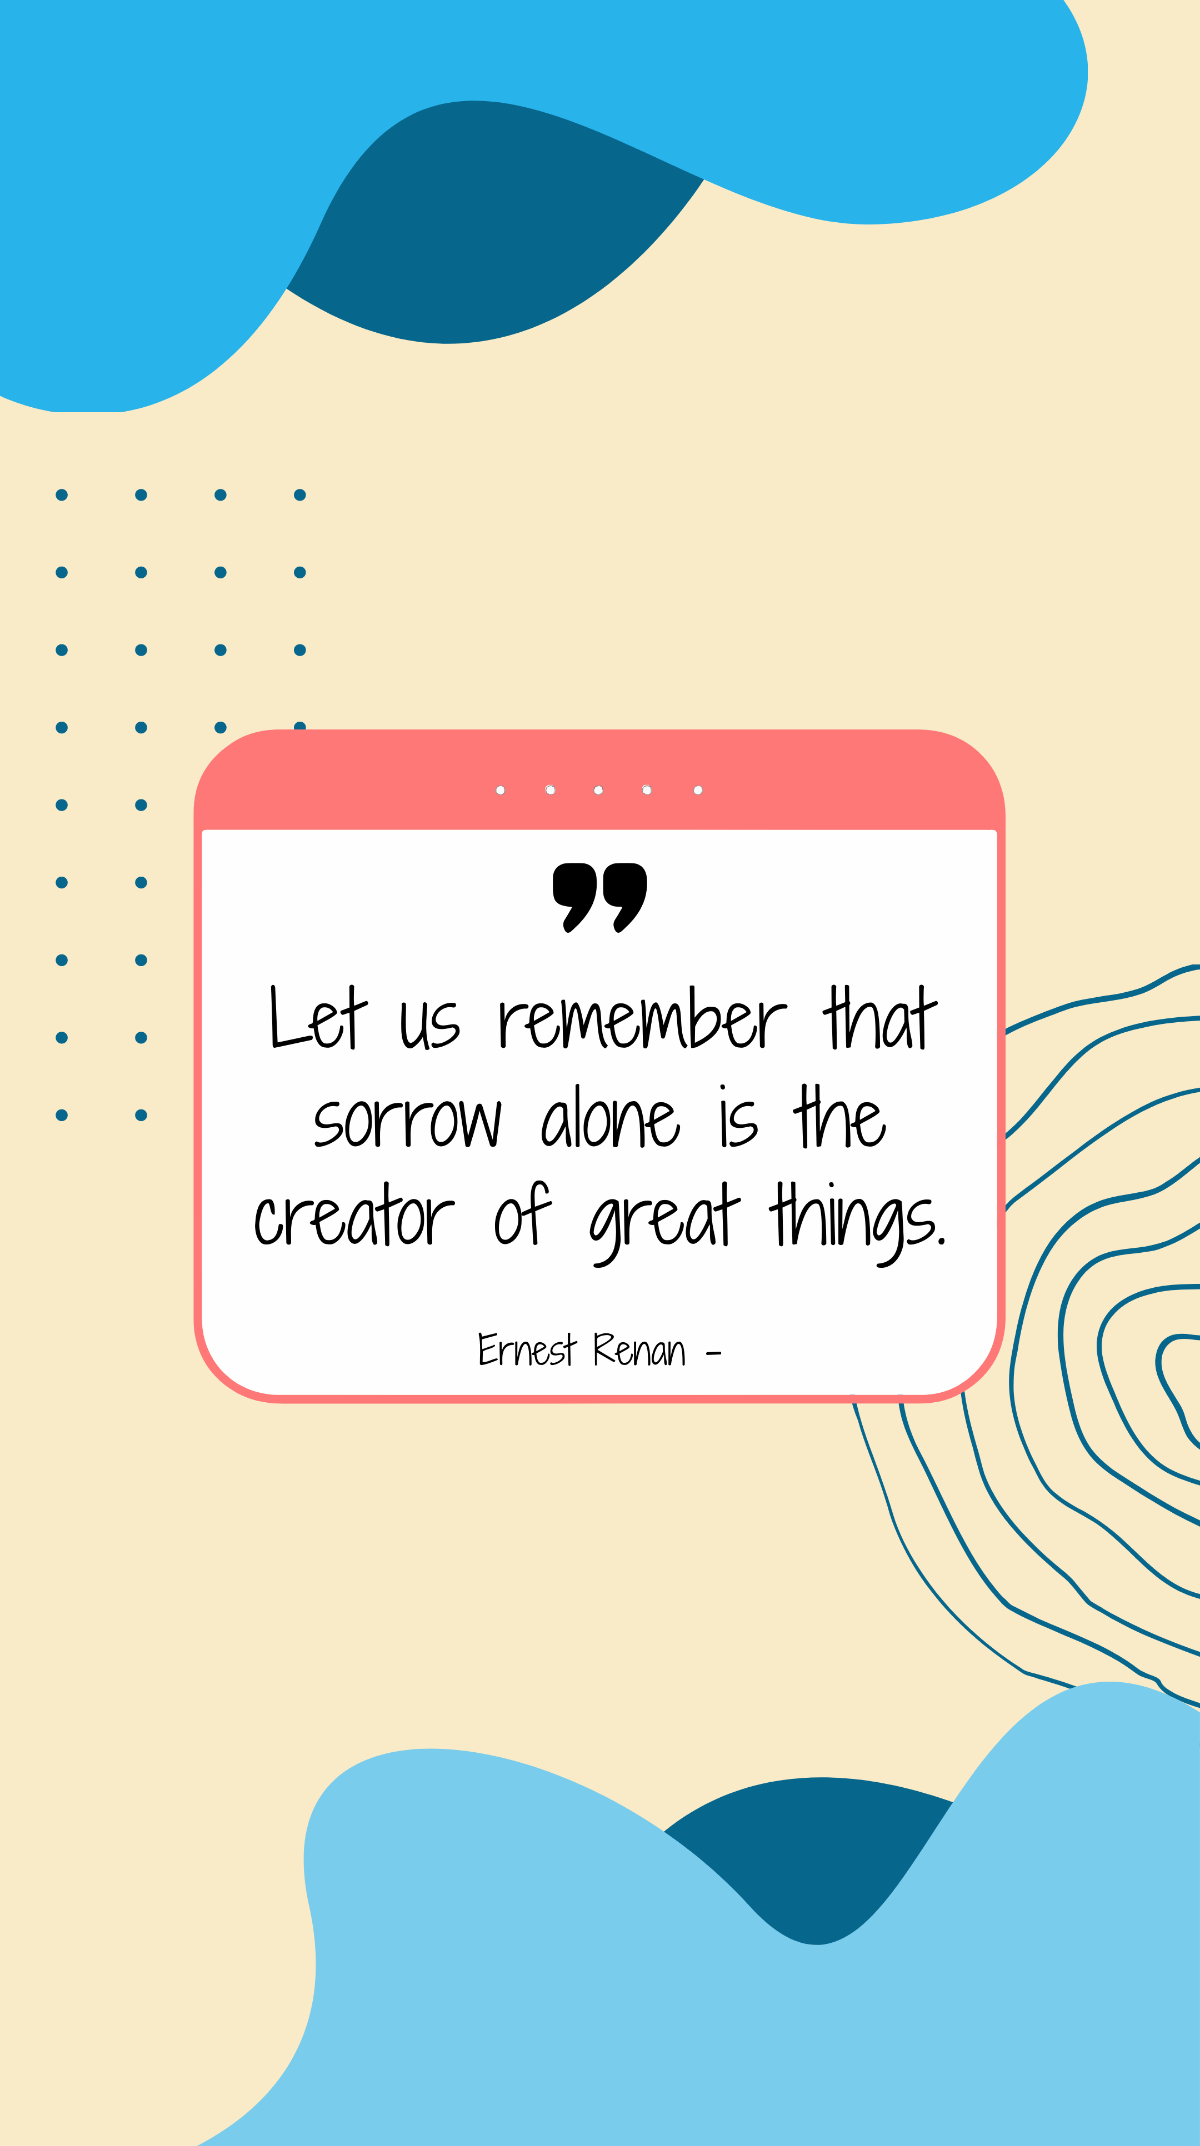 Ernest Renan - Let us remember that sorrow alone is the creator of great things. Template